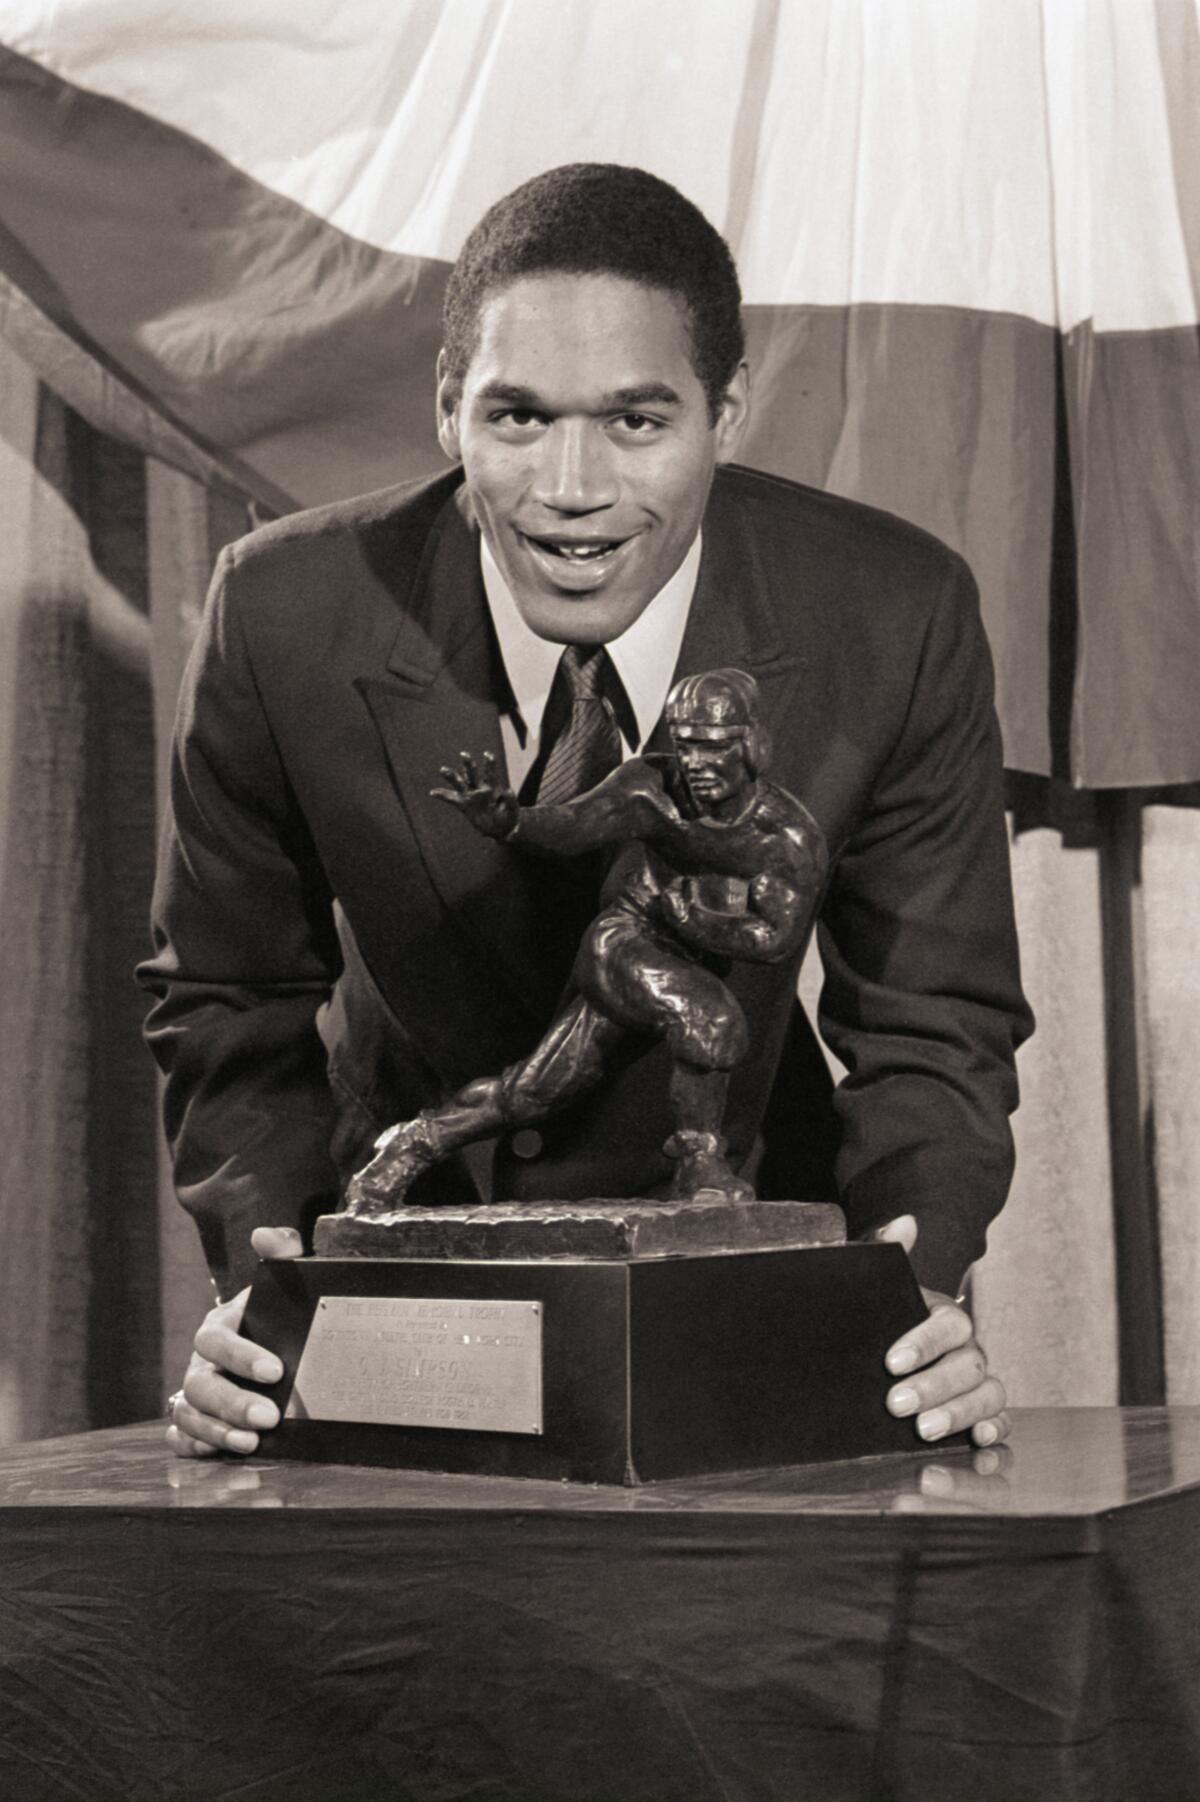 USC running back O.J. Simpson leans over the Heisman Trophy he received on Dec. 5, 1968.